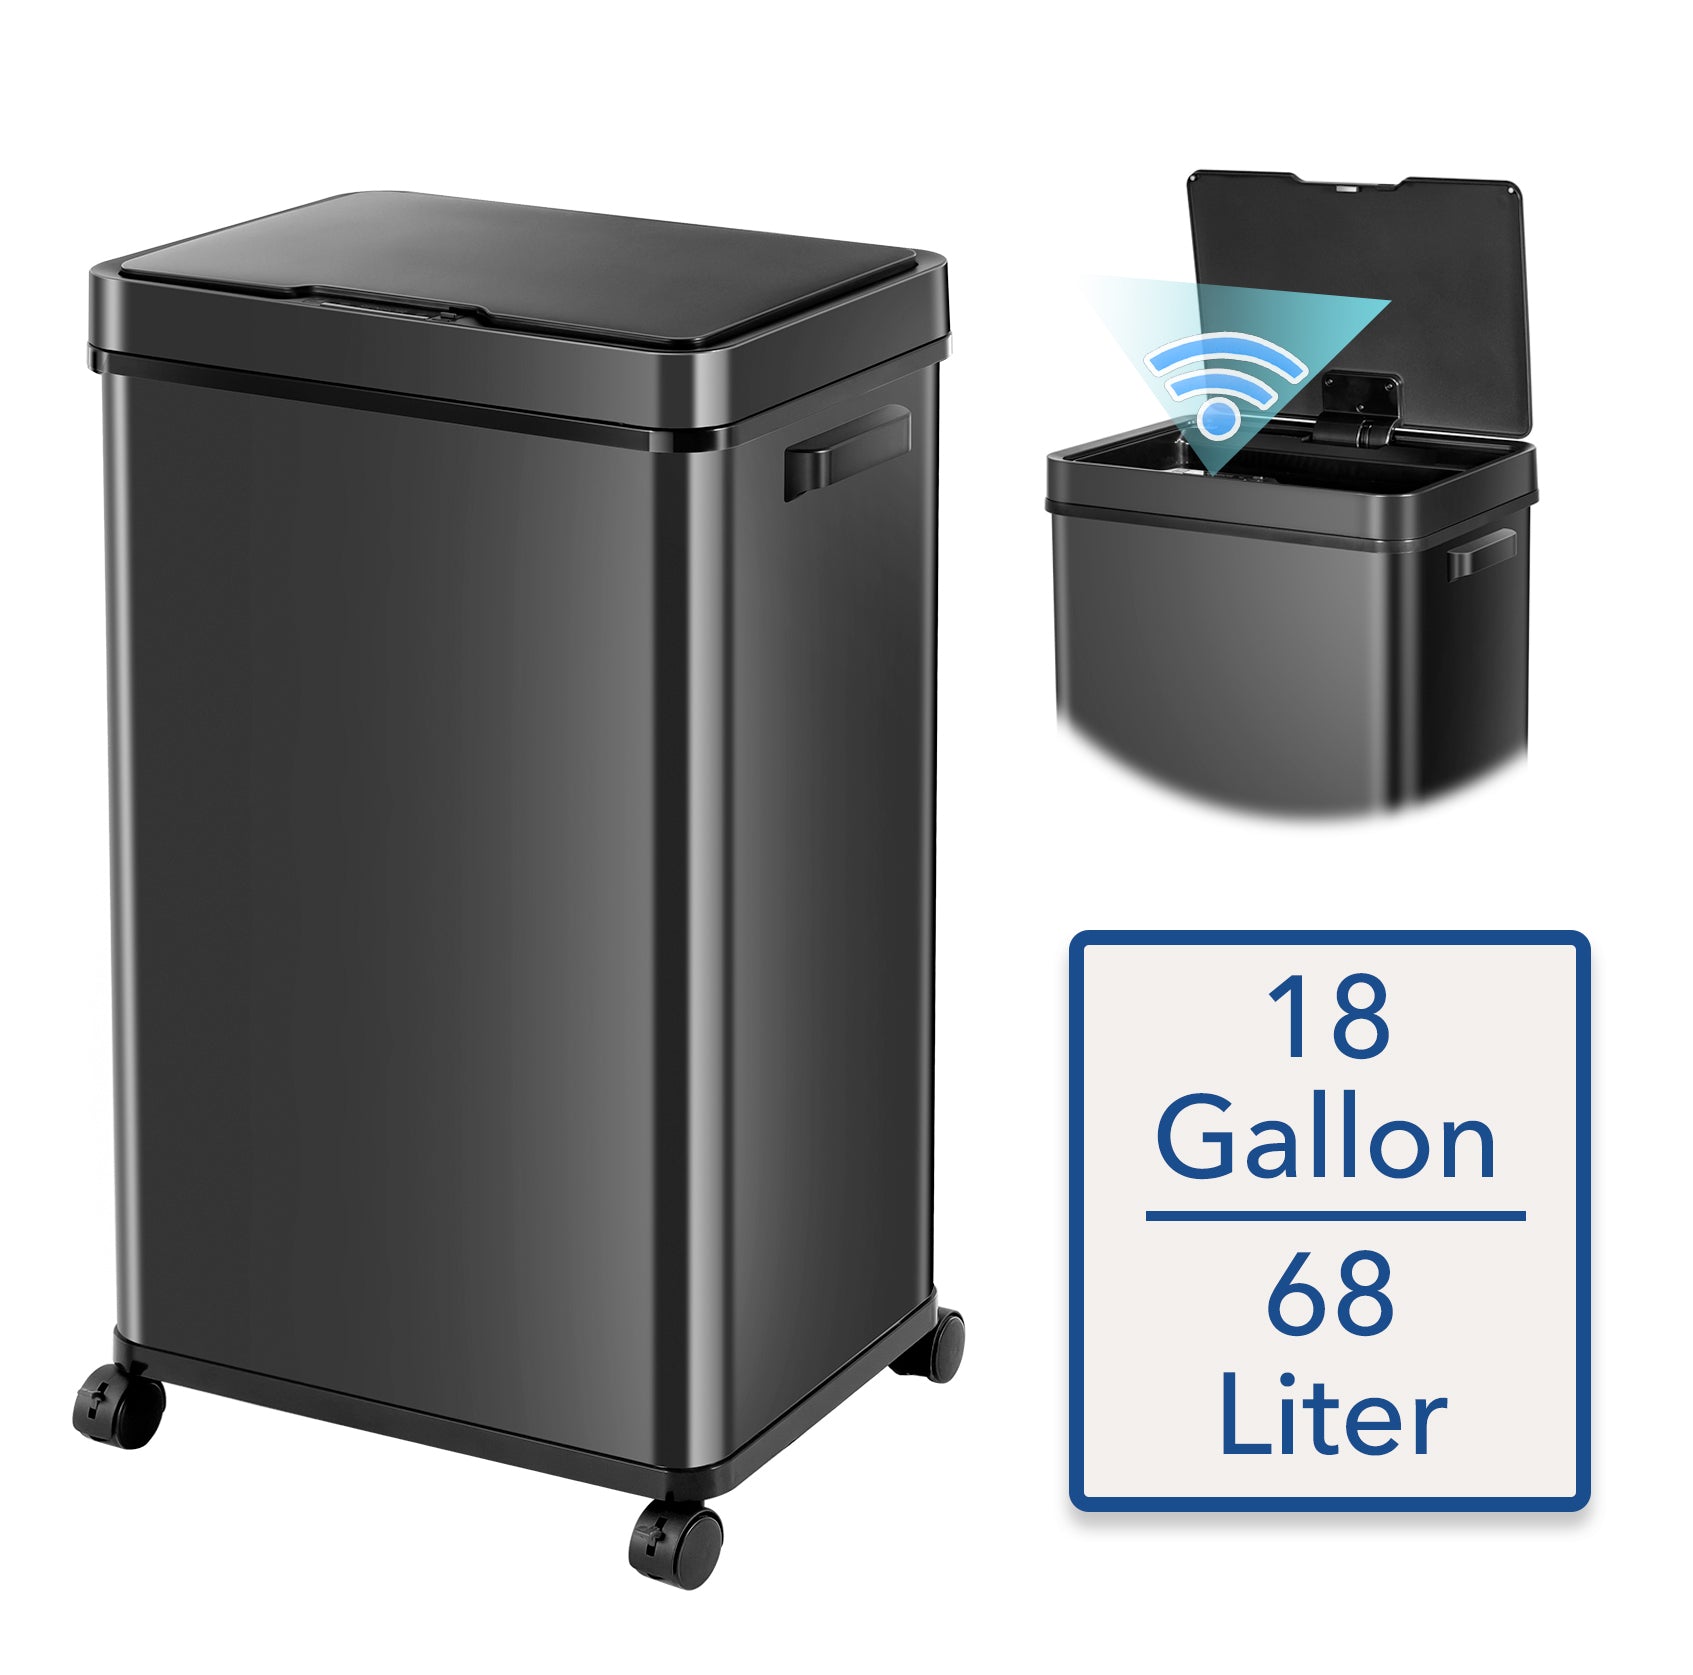 High Quality 3.2 Gallon Trash Can, Plastic Touchless Bathroom